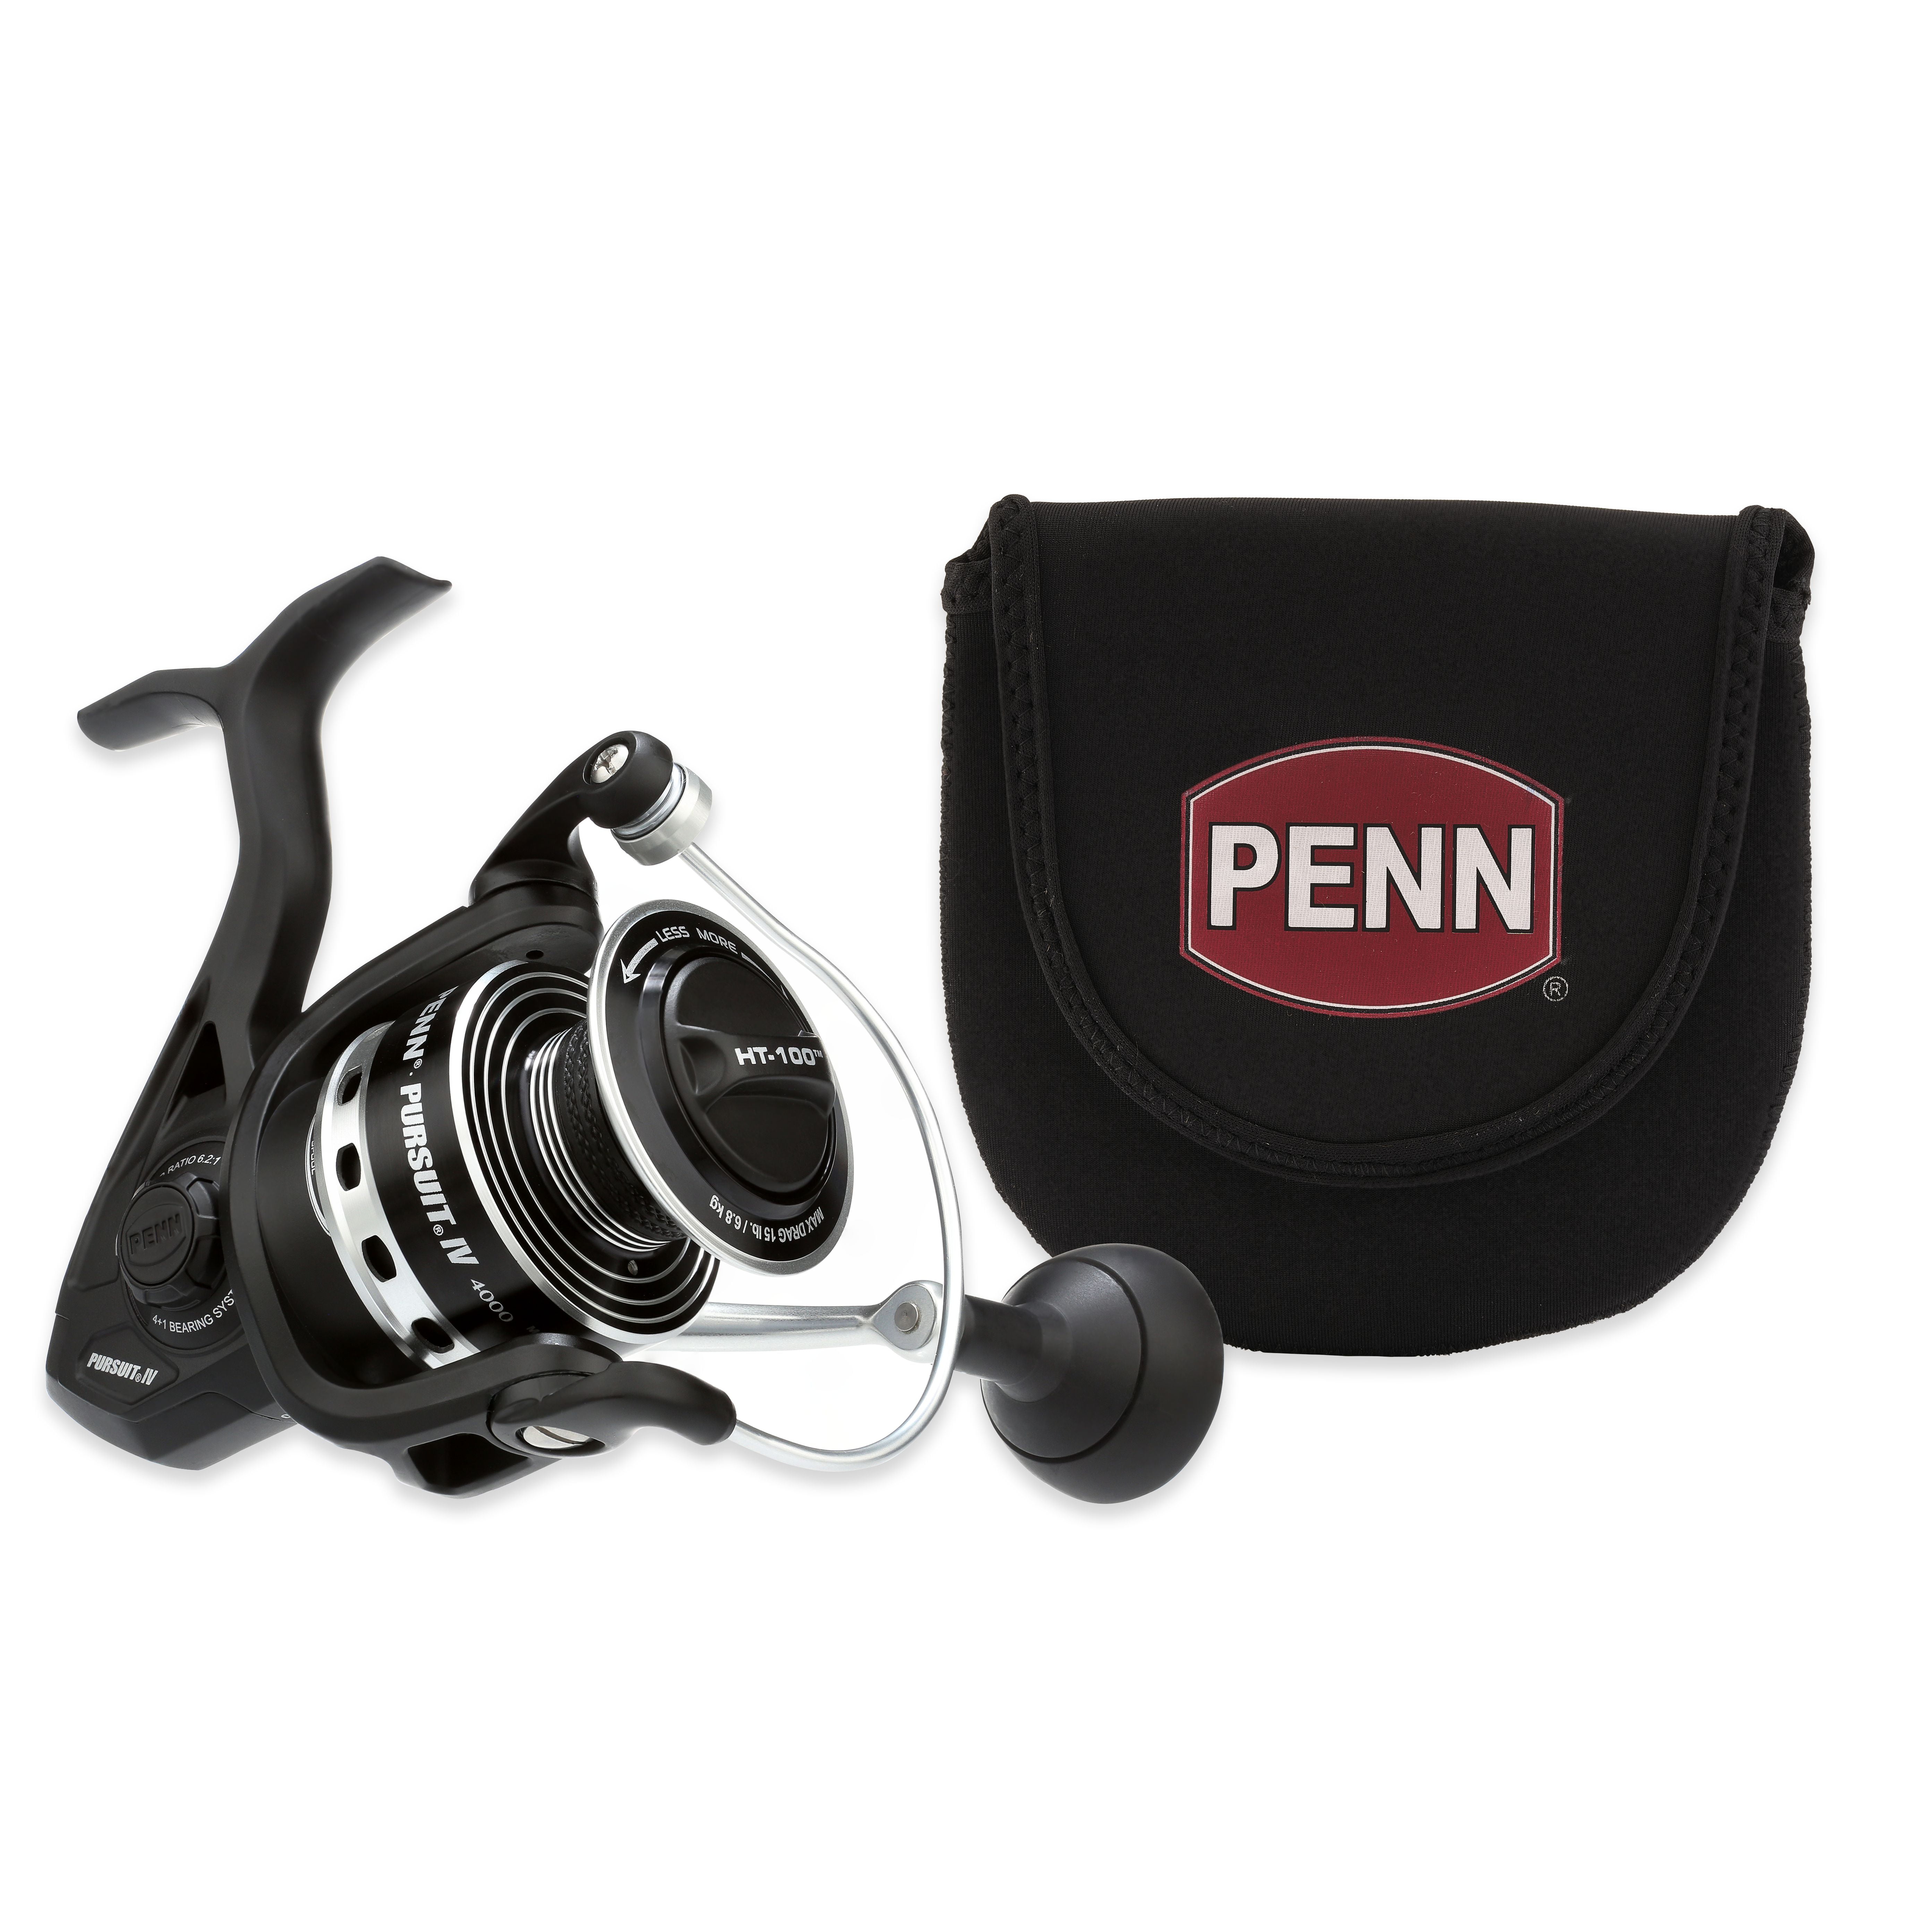 PENN Pursuit IV Spinning Reel Kit - Size 6000 with UK